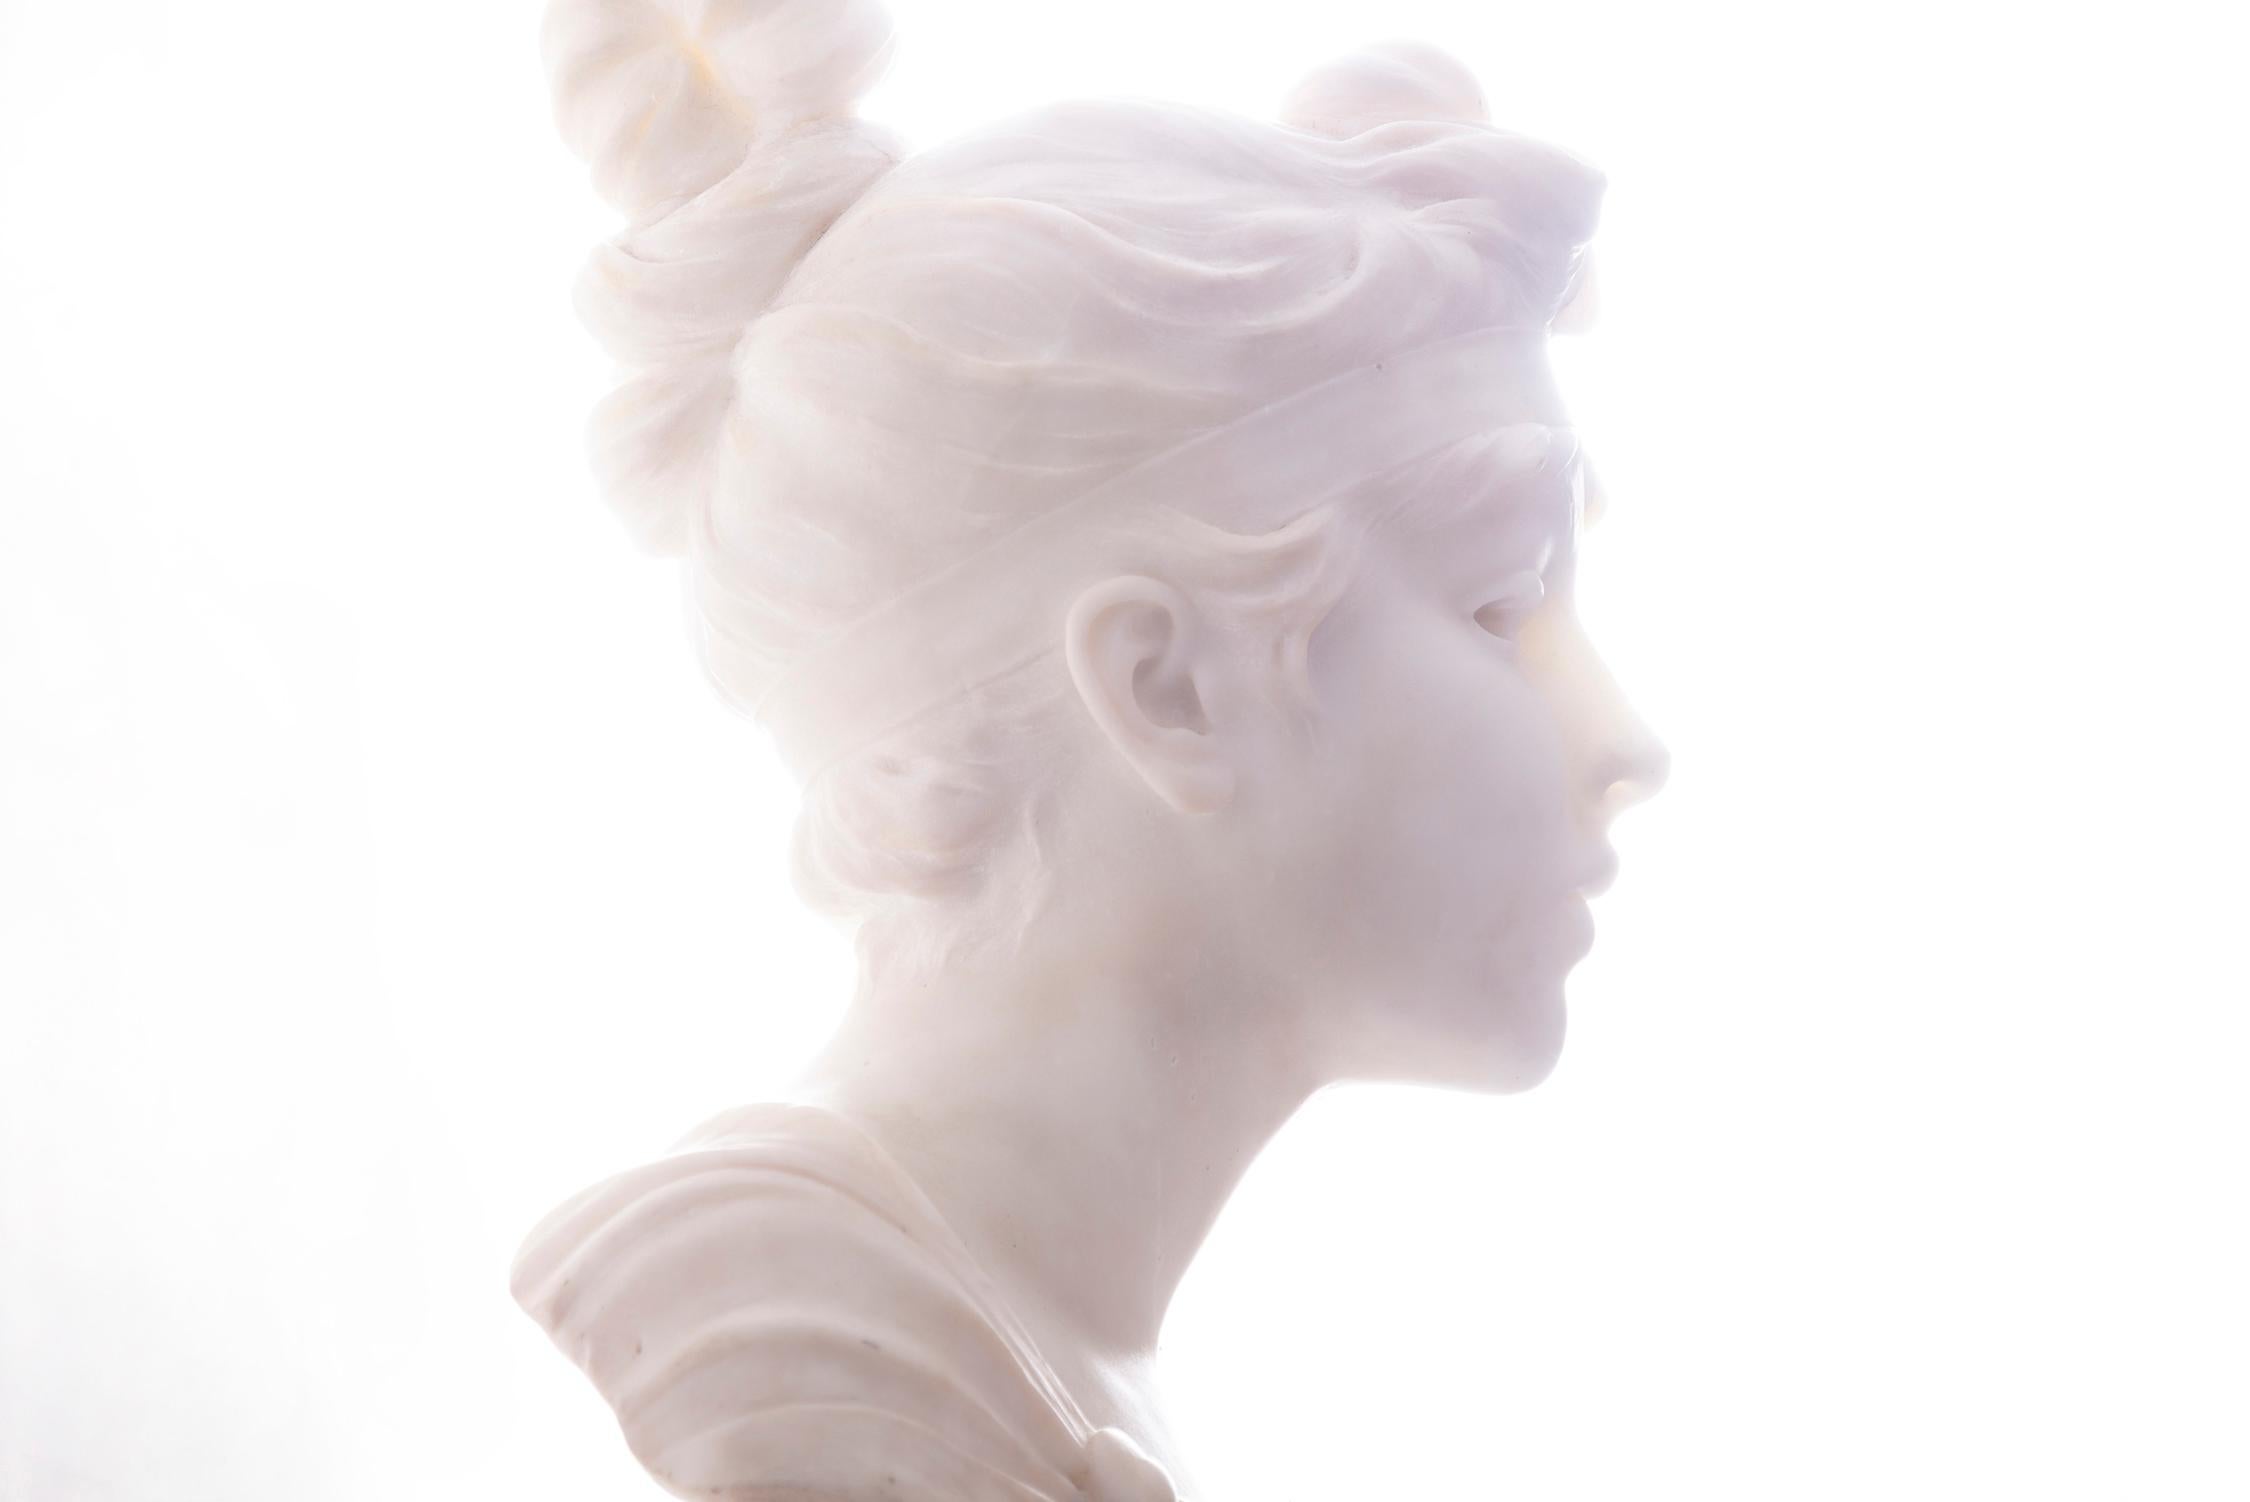 Robert Funk Figurative Photograph - Classical White Marble Statue Phyrne in Silhouette Study in White and Yellow 